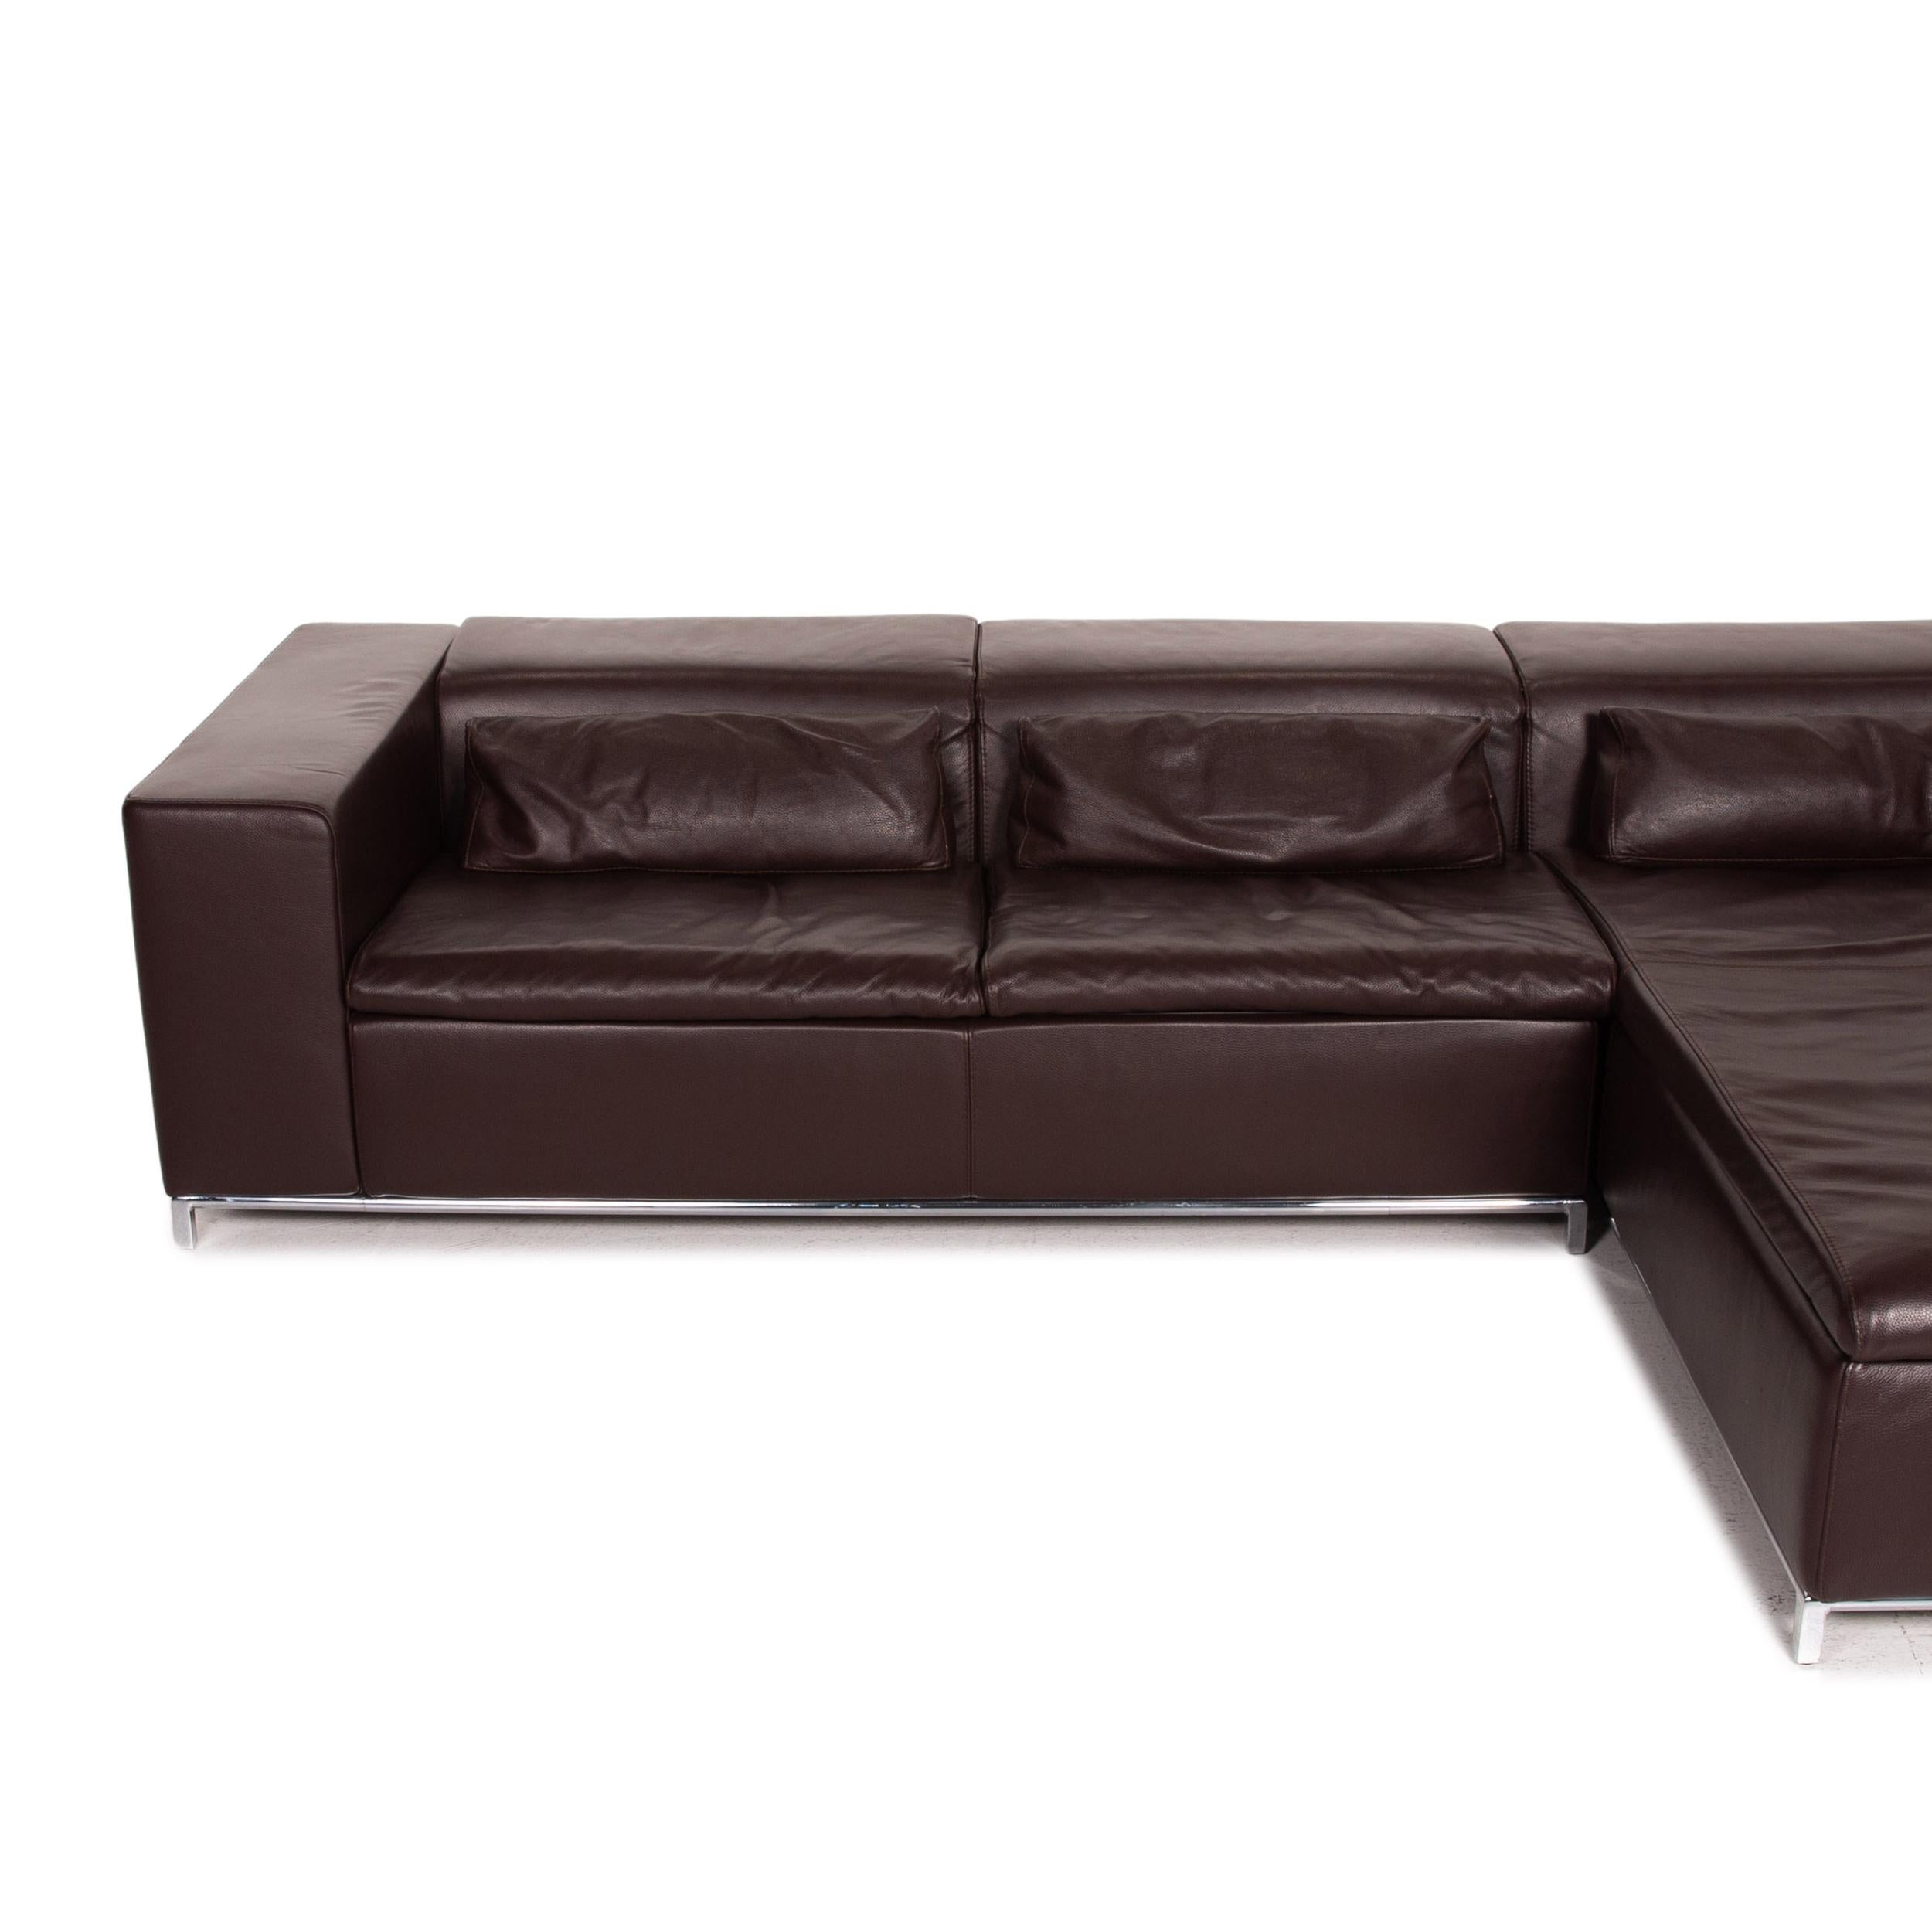 Who's Perfect Leather Corner Sofa Brown Dark Brown Sofa Couch 3